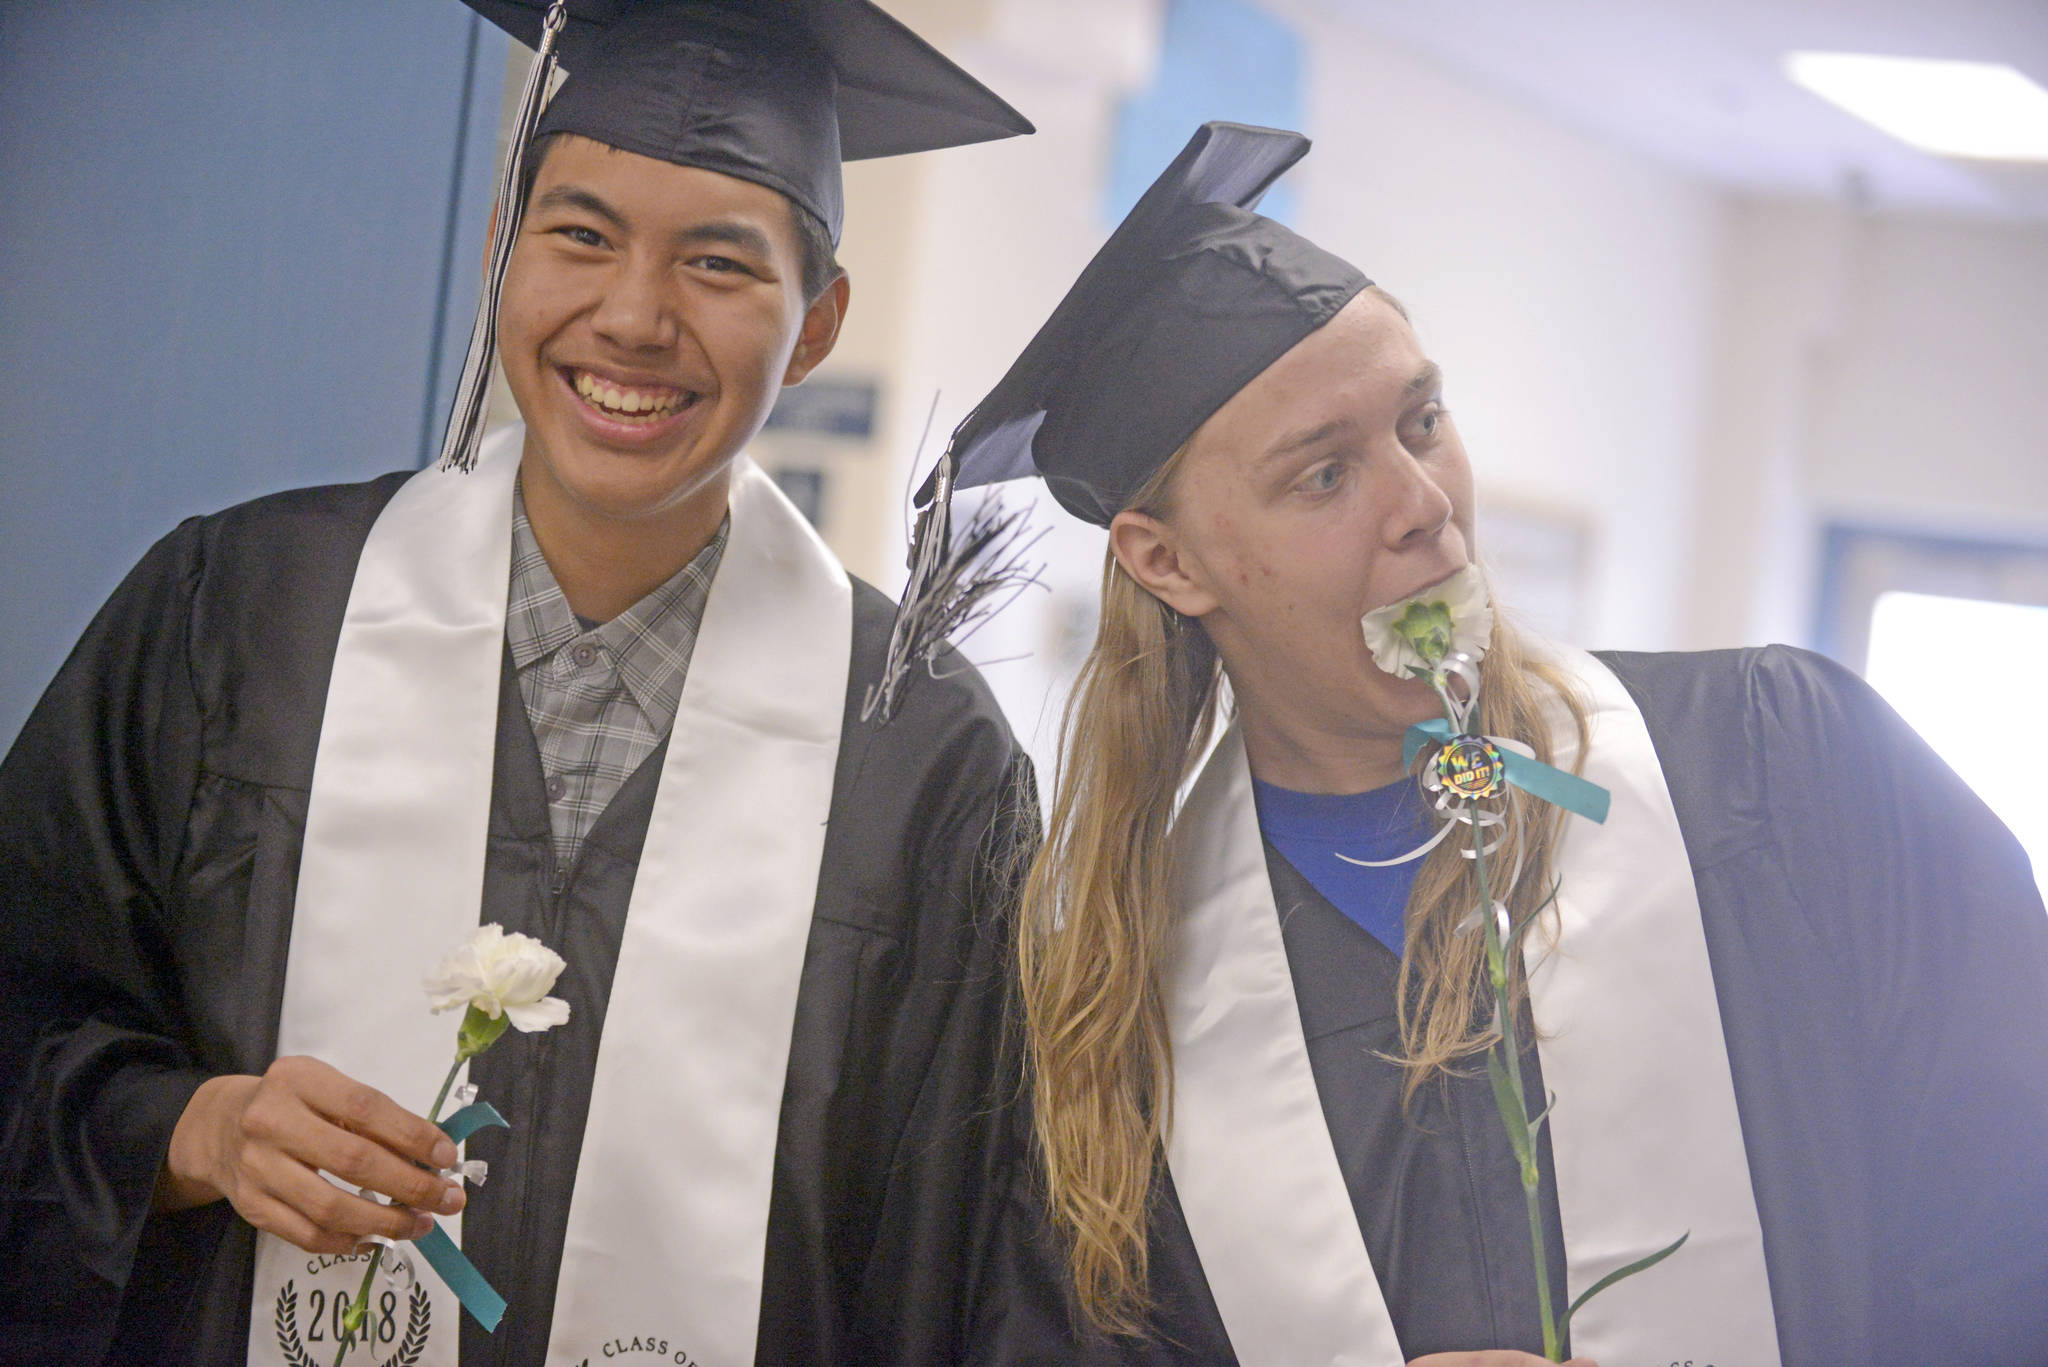 Graduate Henry Heft, left, jokes with a friend ahead of the 2018 commencement ceremony at Nikiski High School on Wednesday. Heft will begin a five-year stint in the U.S. Army in June. (Photo by Erin Thompson/Peninsula Clarion)